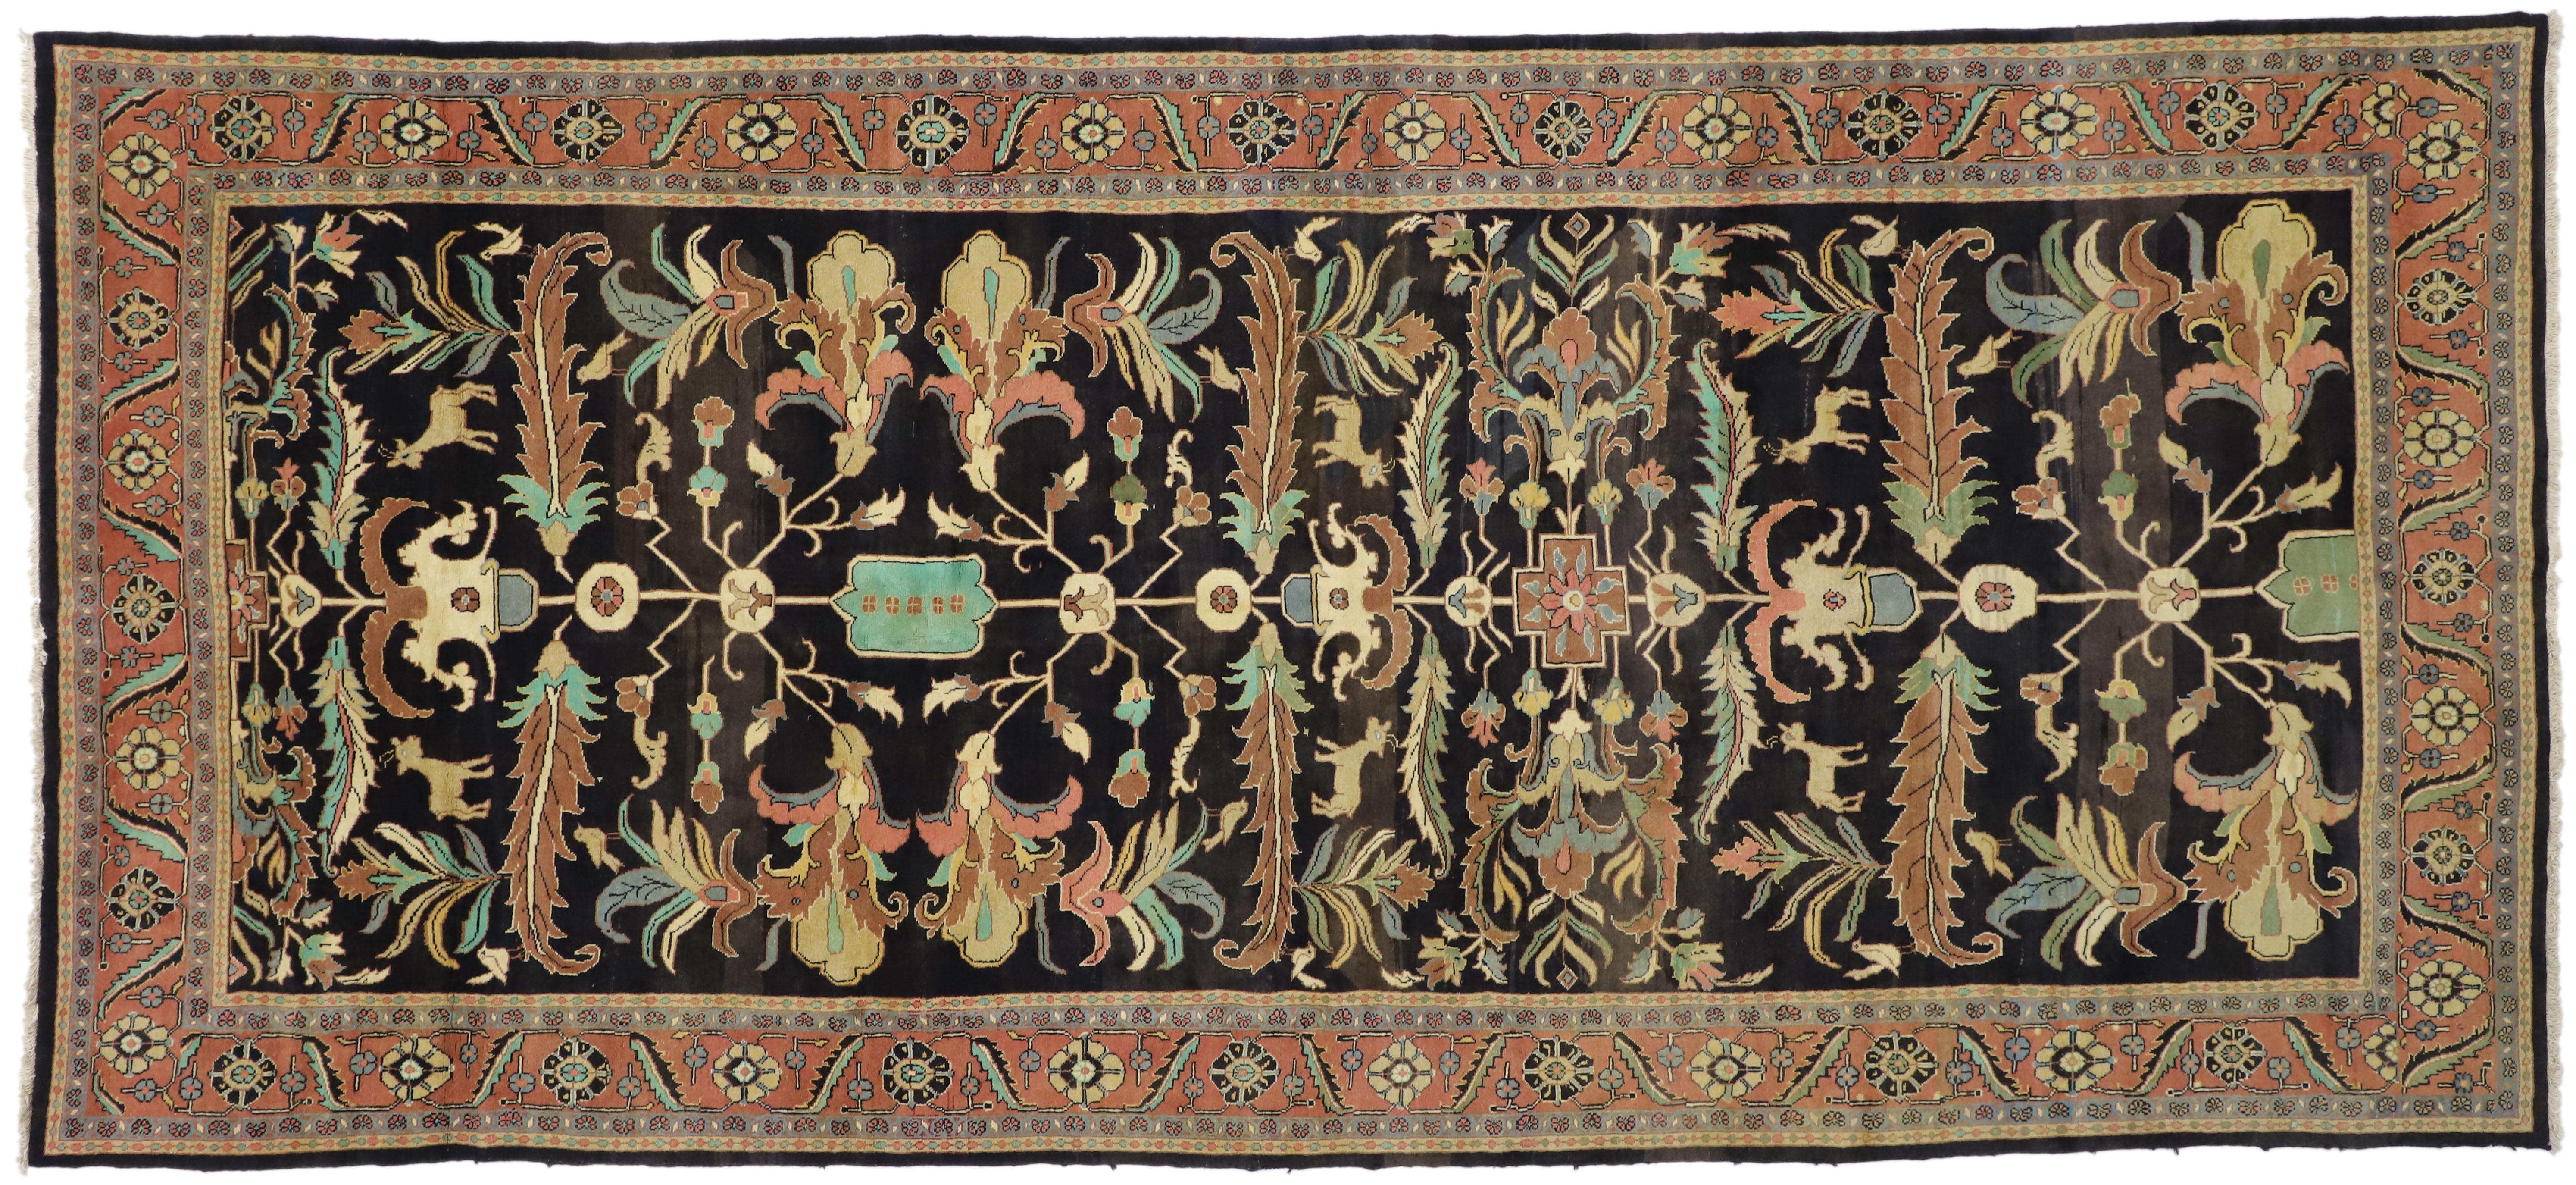 Vintage Persian Mahal Rug Inspired by William Morris In Good Condition For Sale In Dallas, TX